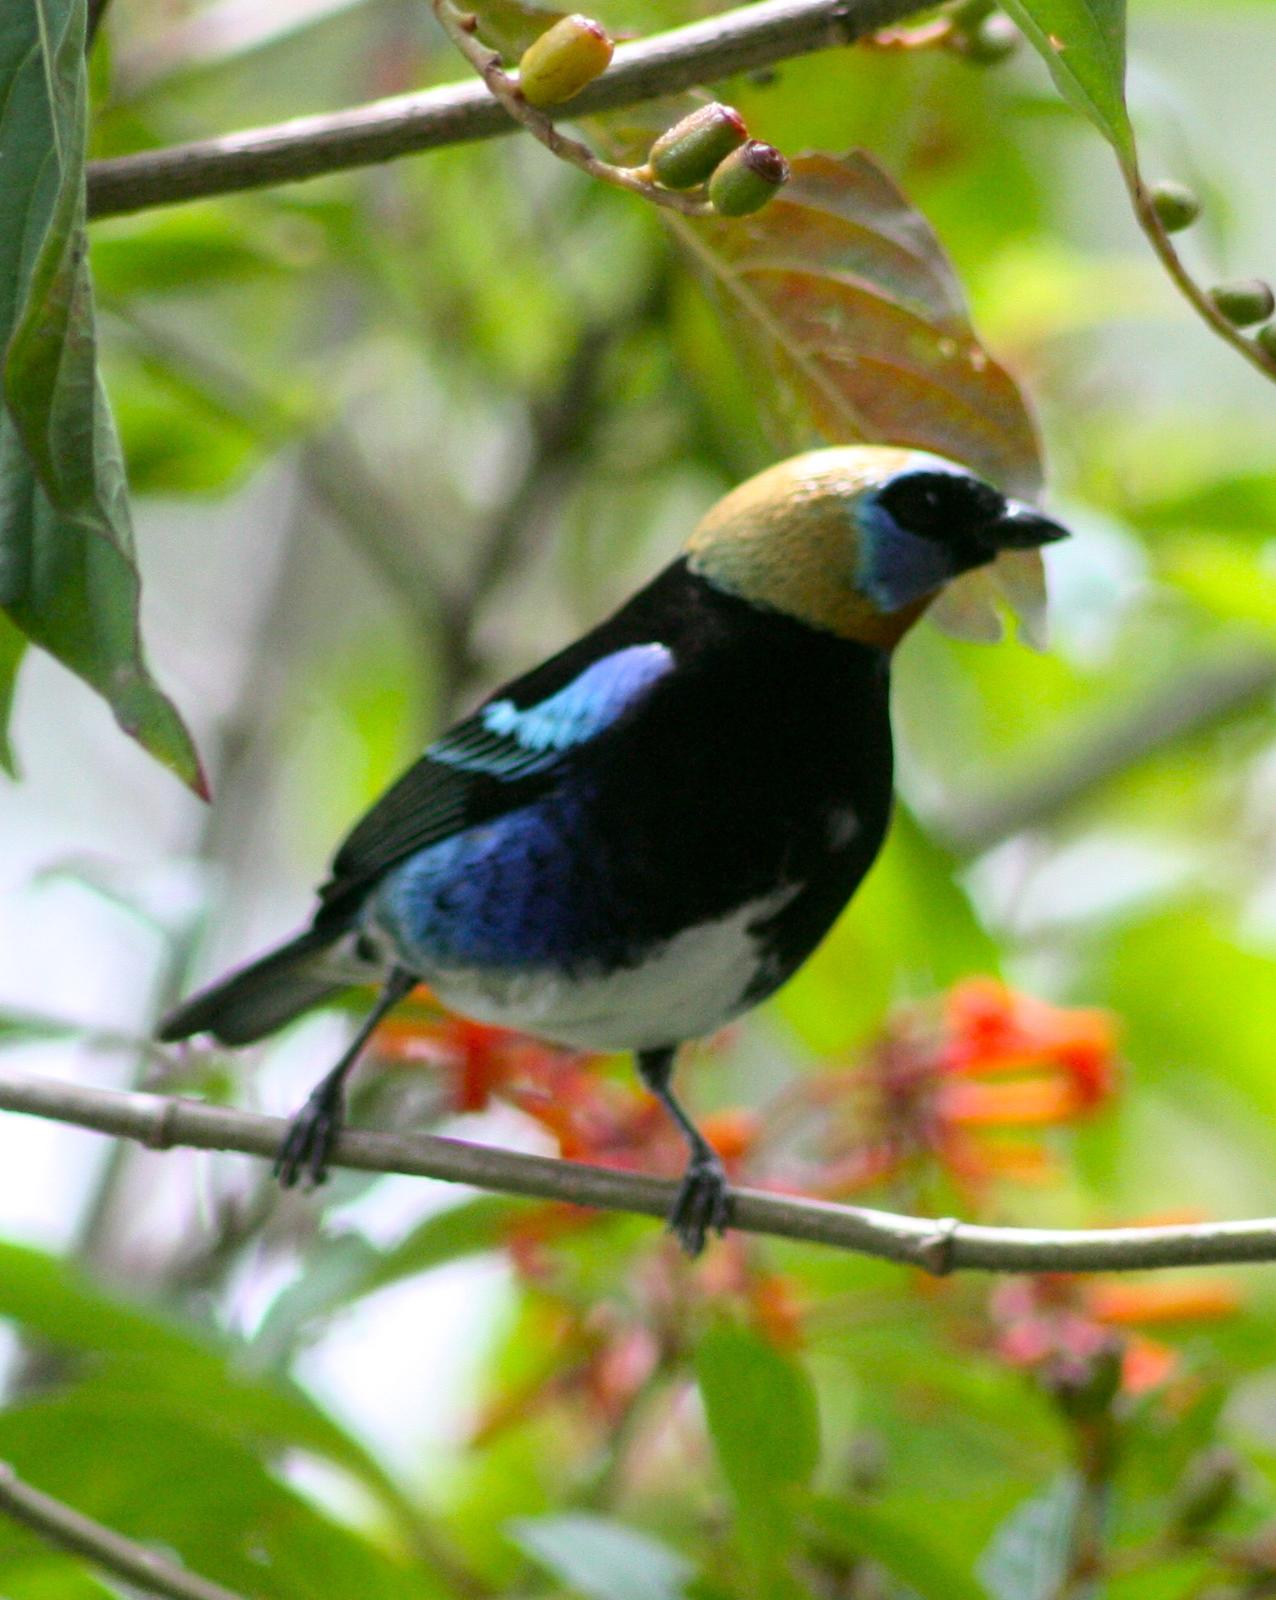 Golden-hooded Tanager Photo by Donald Sloth